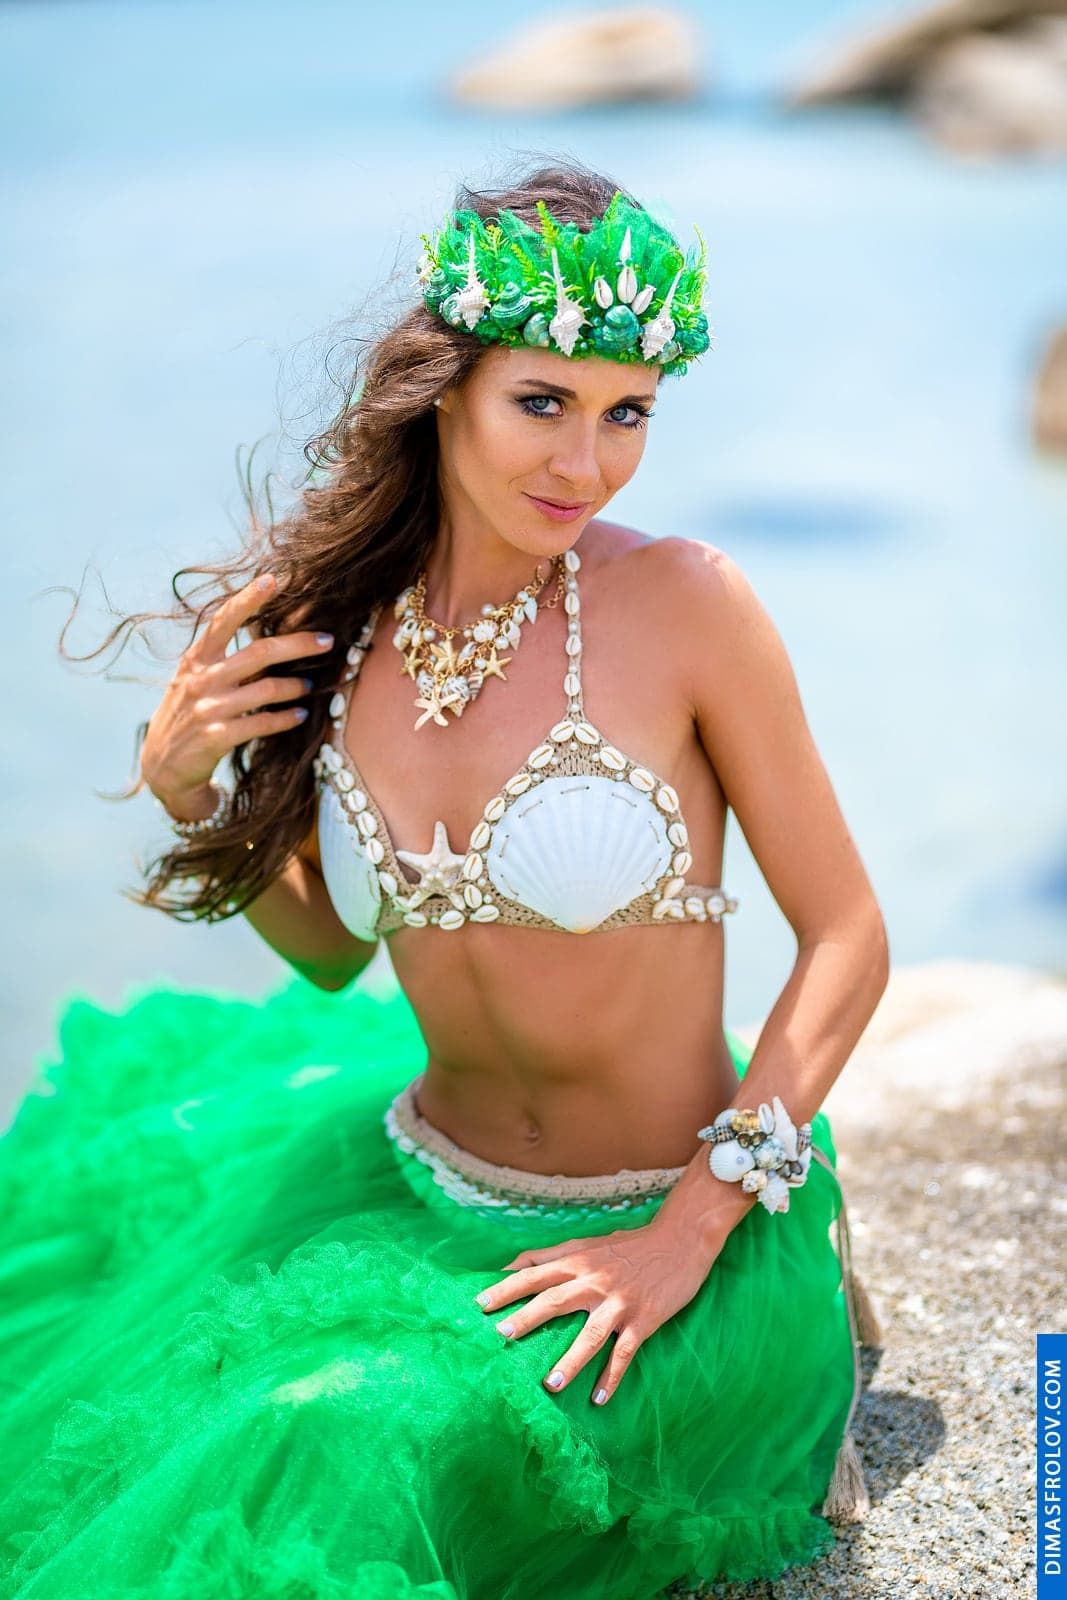 Unique shell accessories for a themed photo shoot on Koh Samui. photographer Dimas Frolov. photo1653